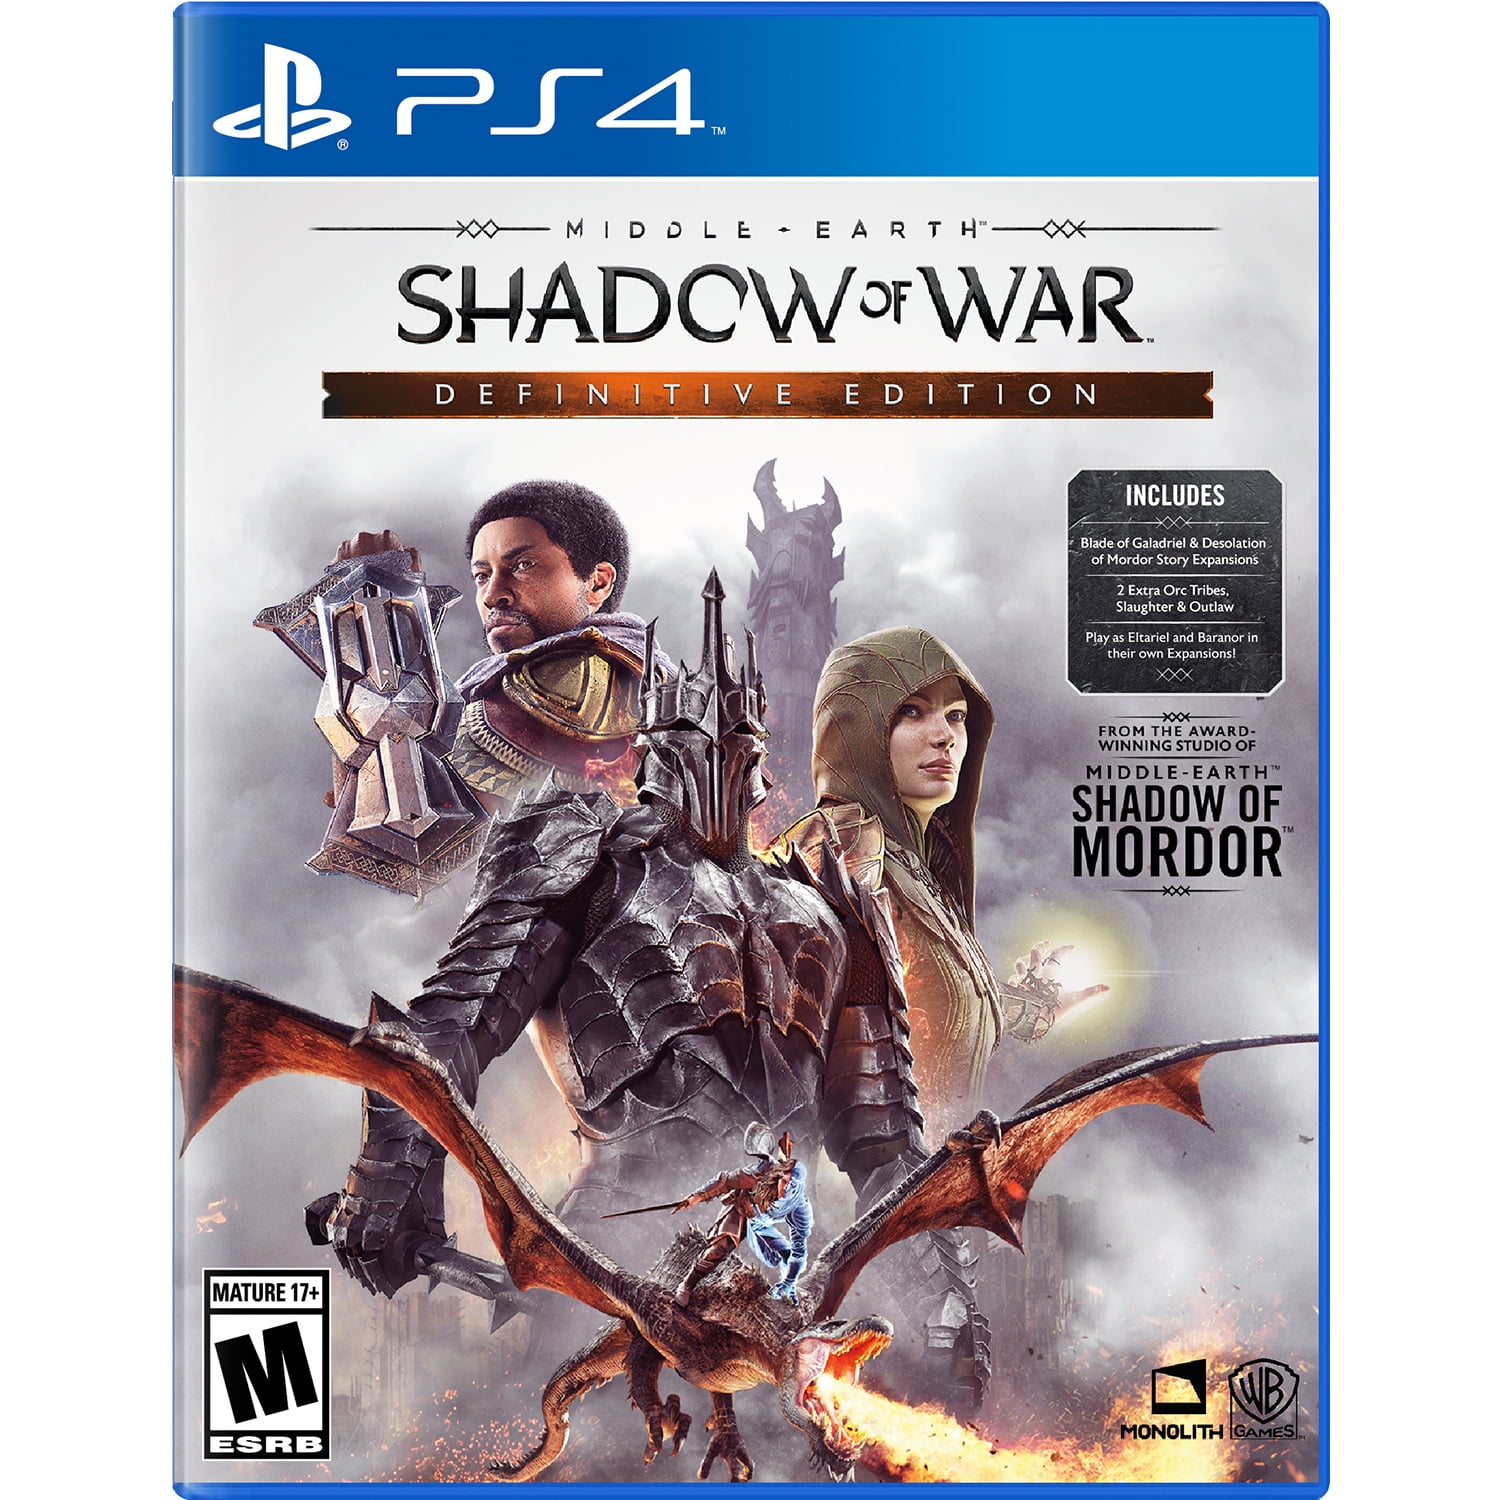 Middle-earth: Shadow of War Definitive Edition - What's included